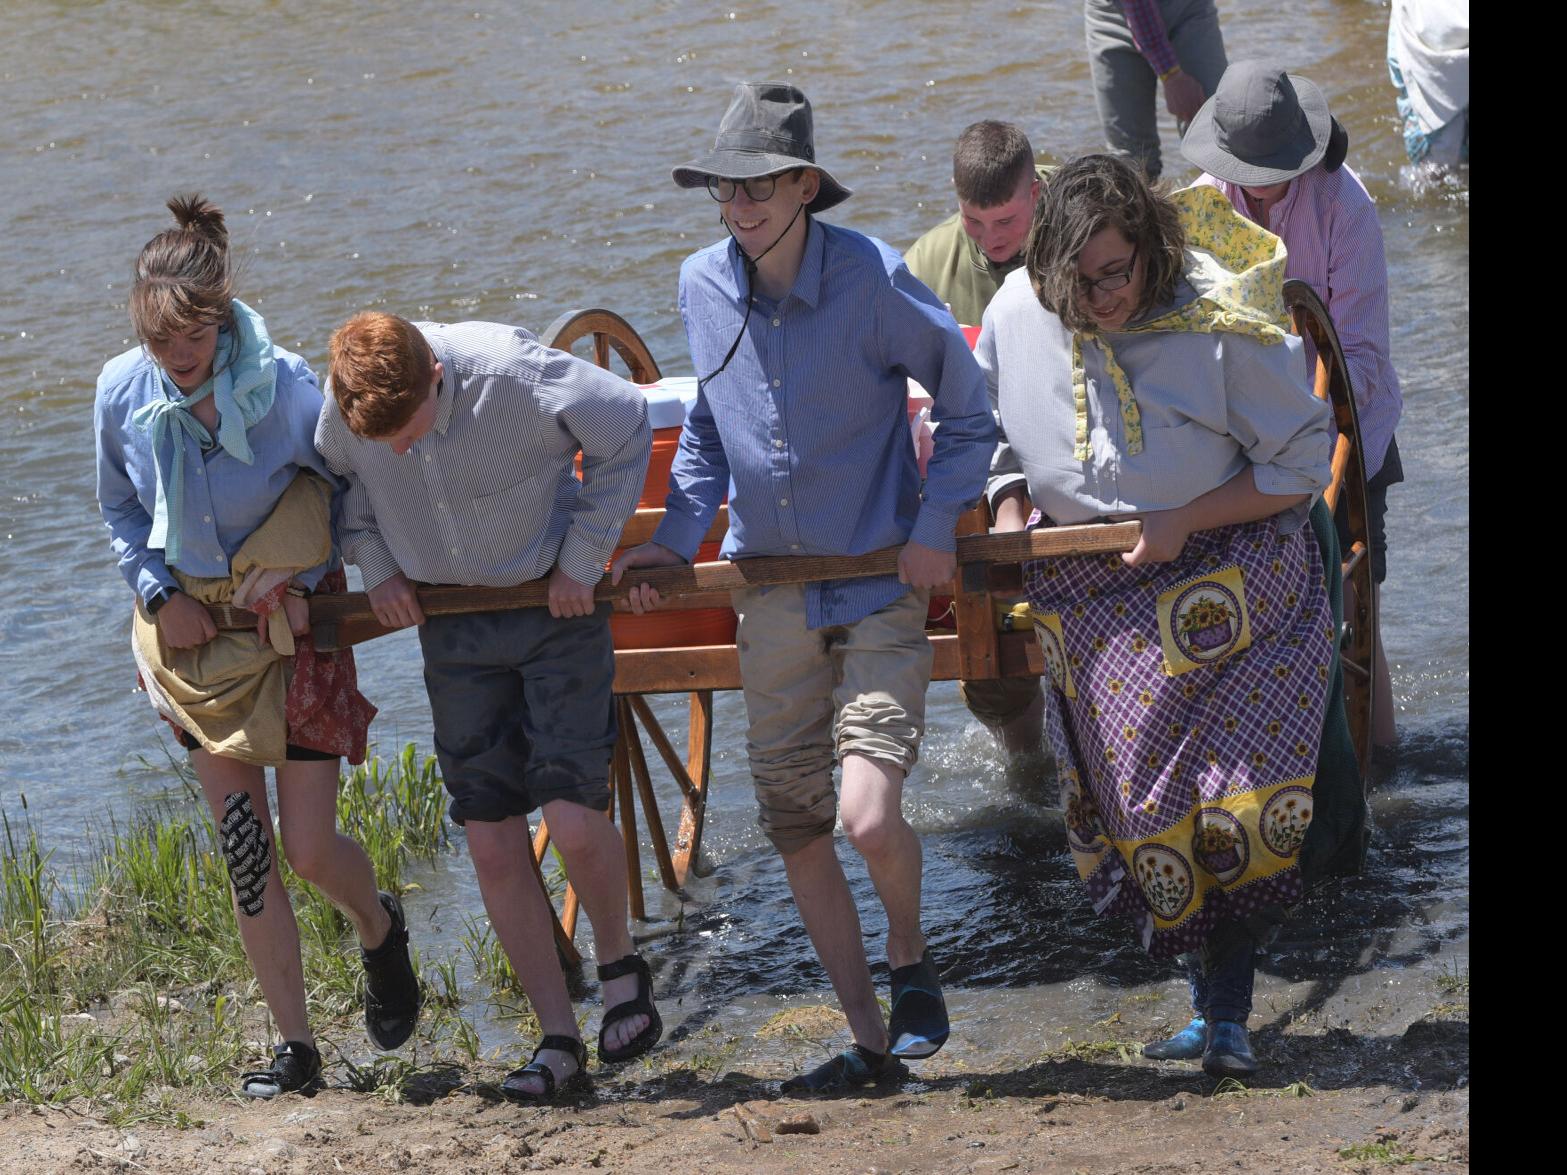 No one left behind': Local stakes embark on LDS pioneer treks